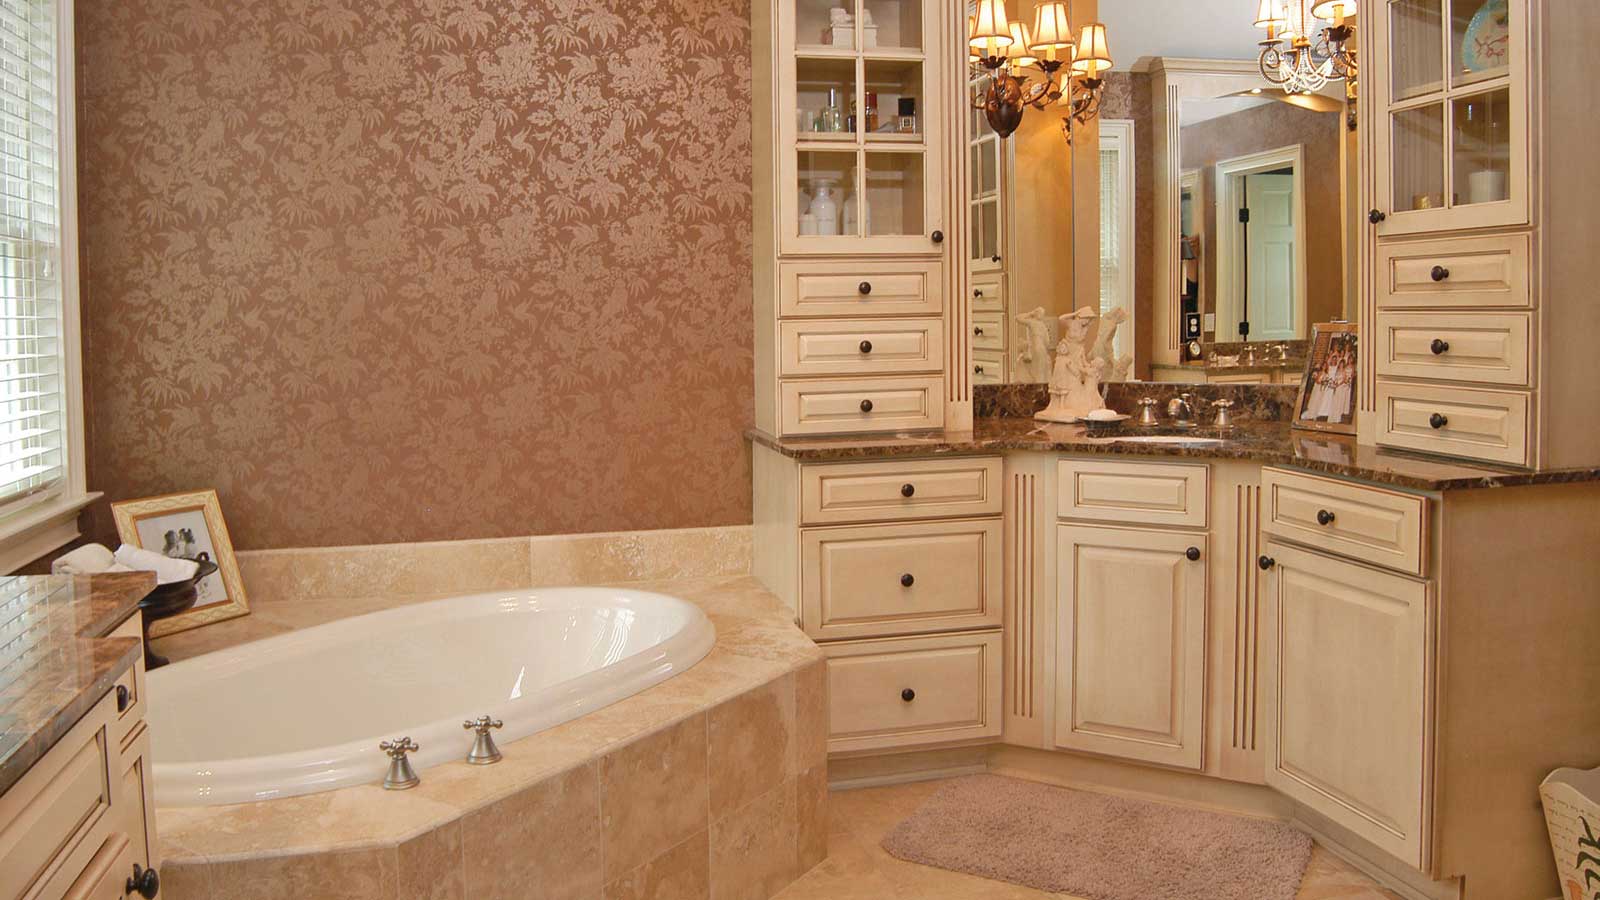 Precision Cabinets, Inc. in Boone, NC designs cabinetry, woodwork, etc.